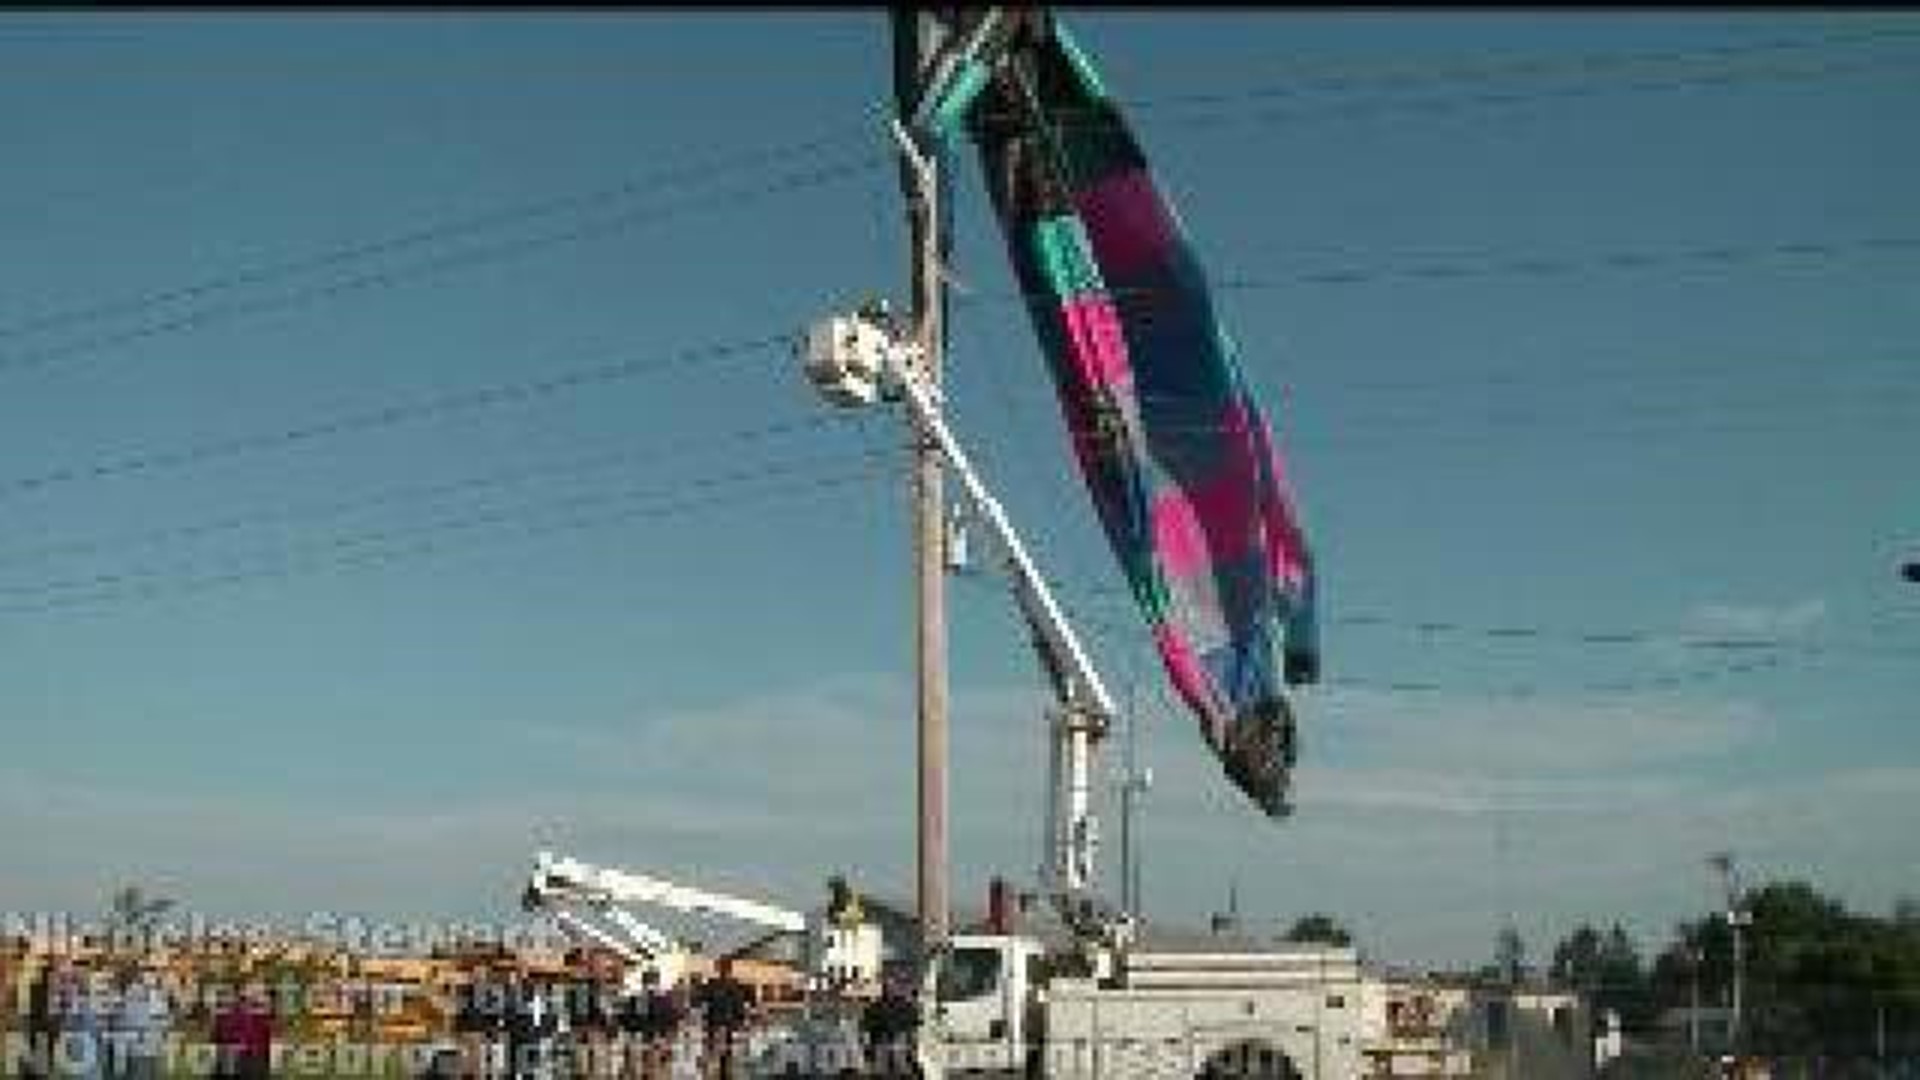 Hot air balloon collides with power lines